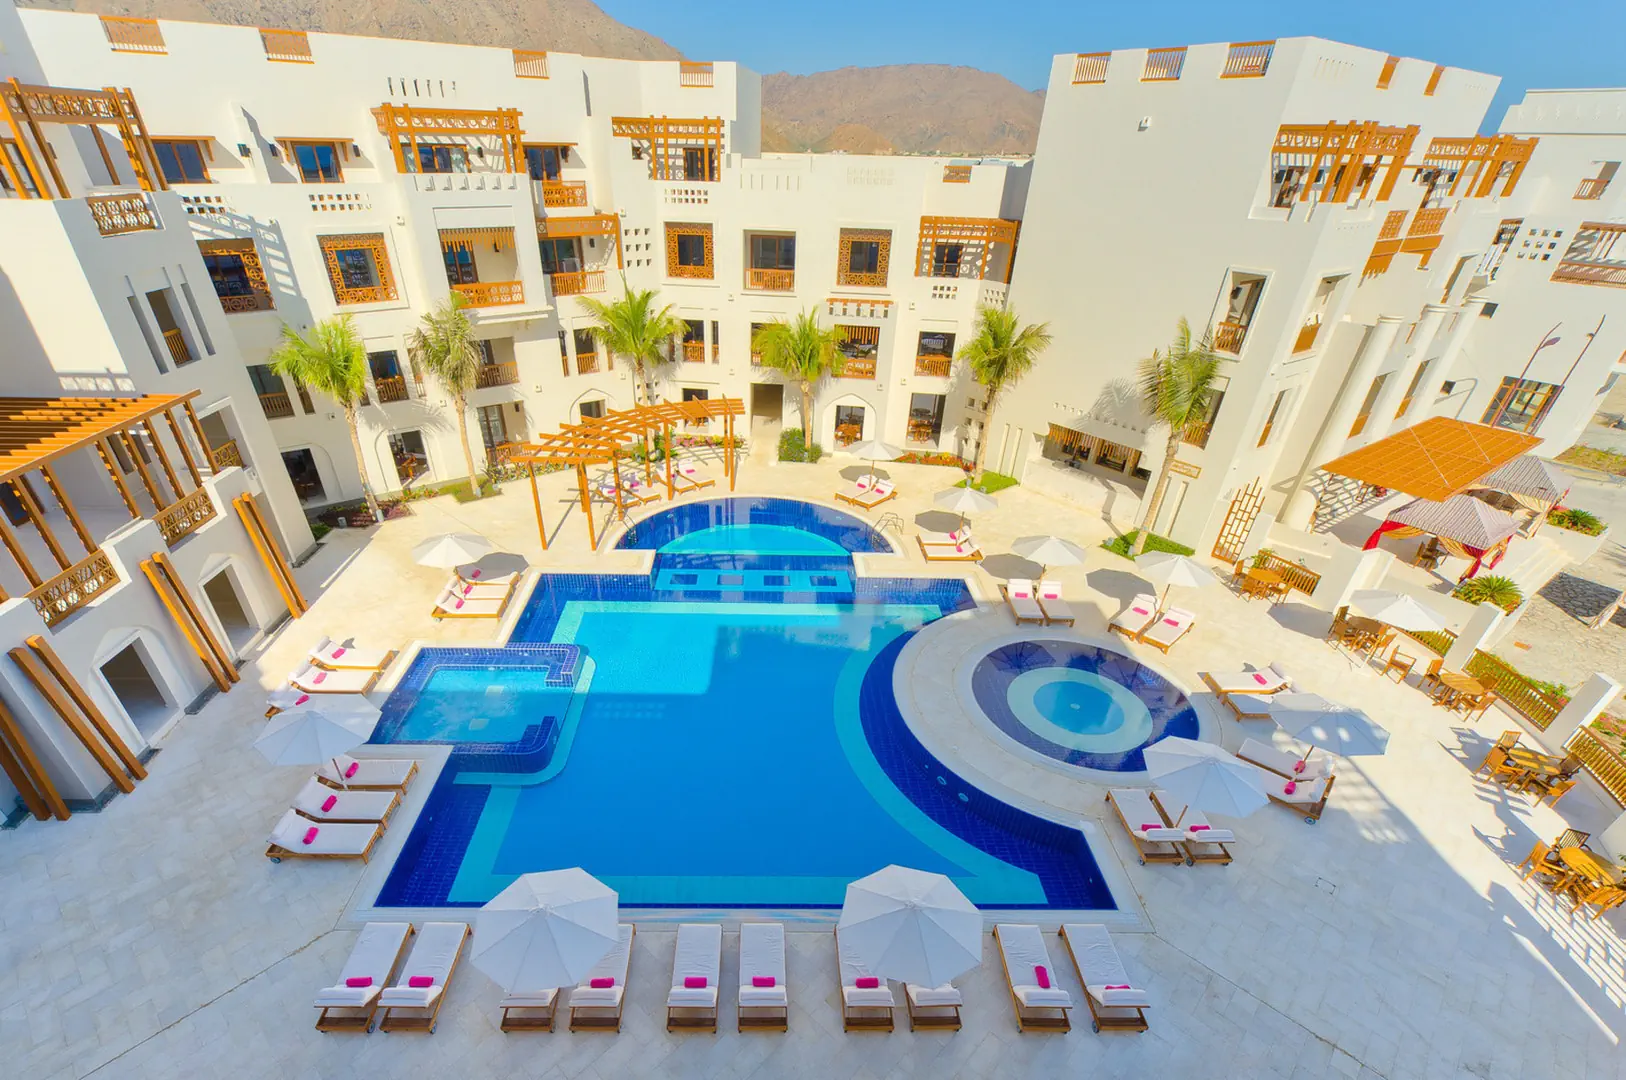 Oman Maskat As Sifah Sifawy Boutique Hotel